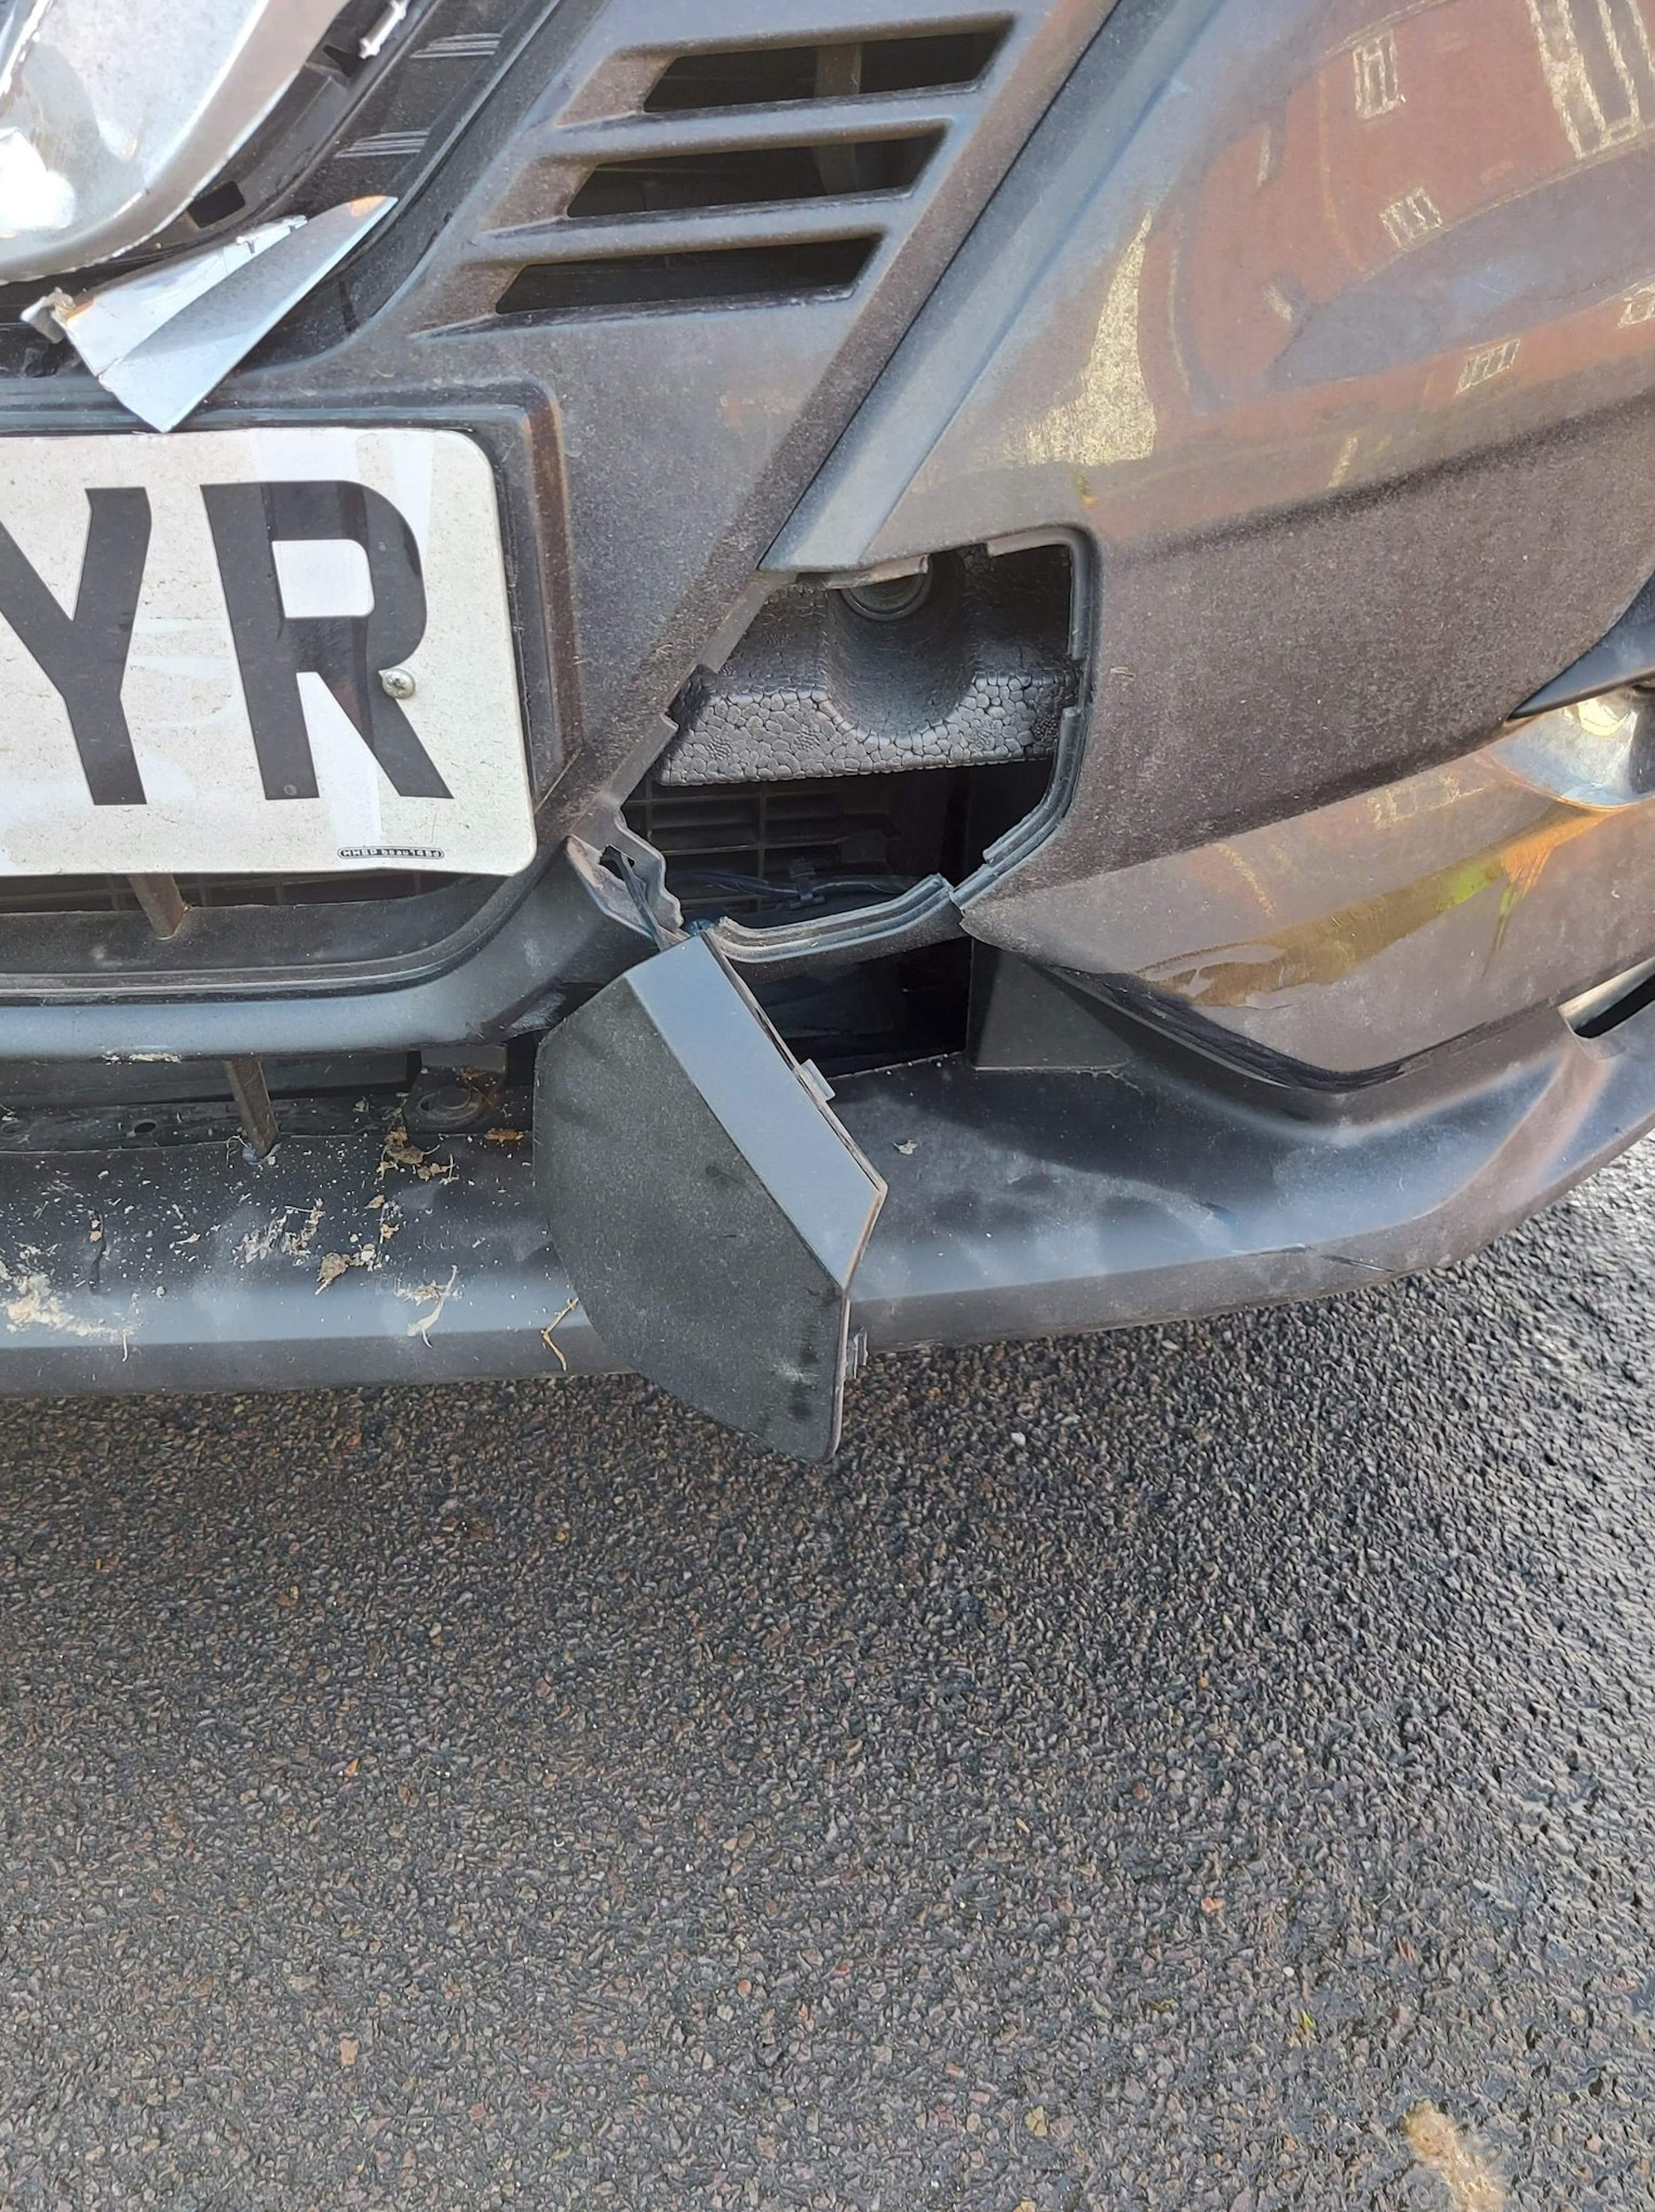 Damage to car by Yodel - Consumer News UK